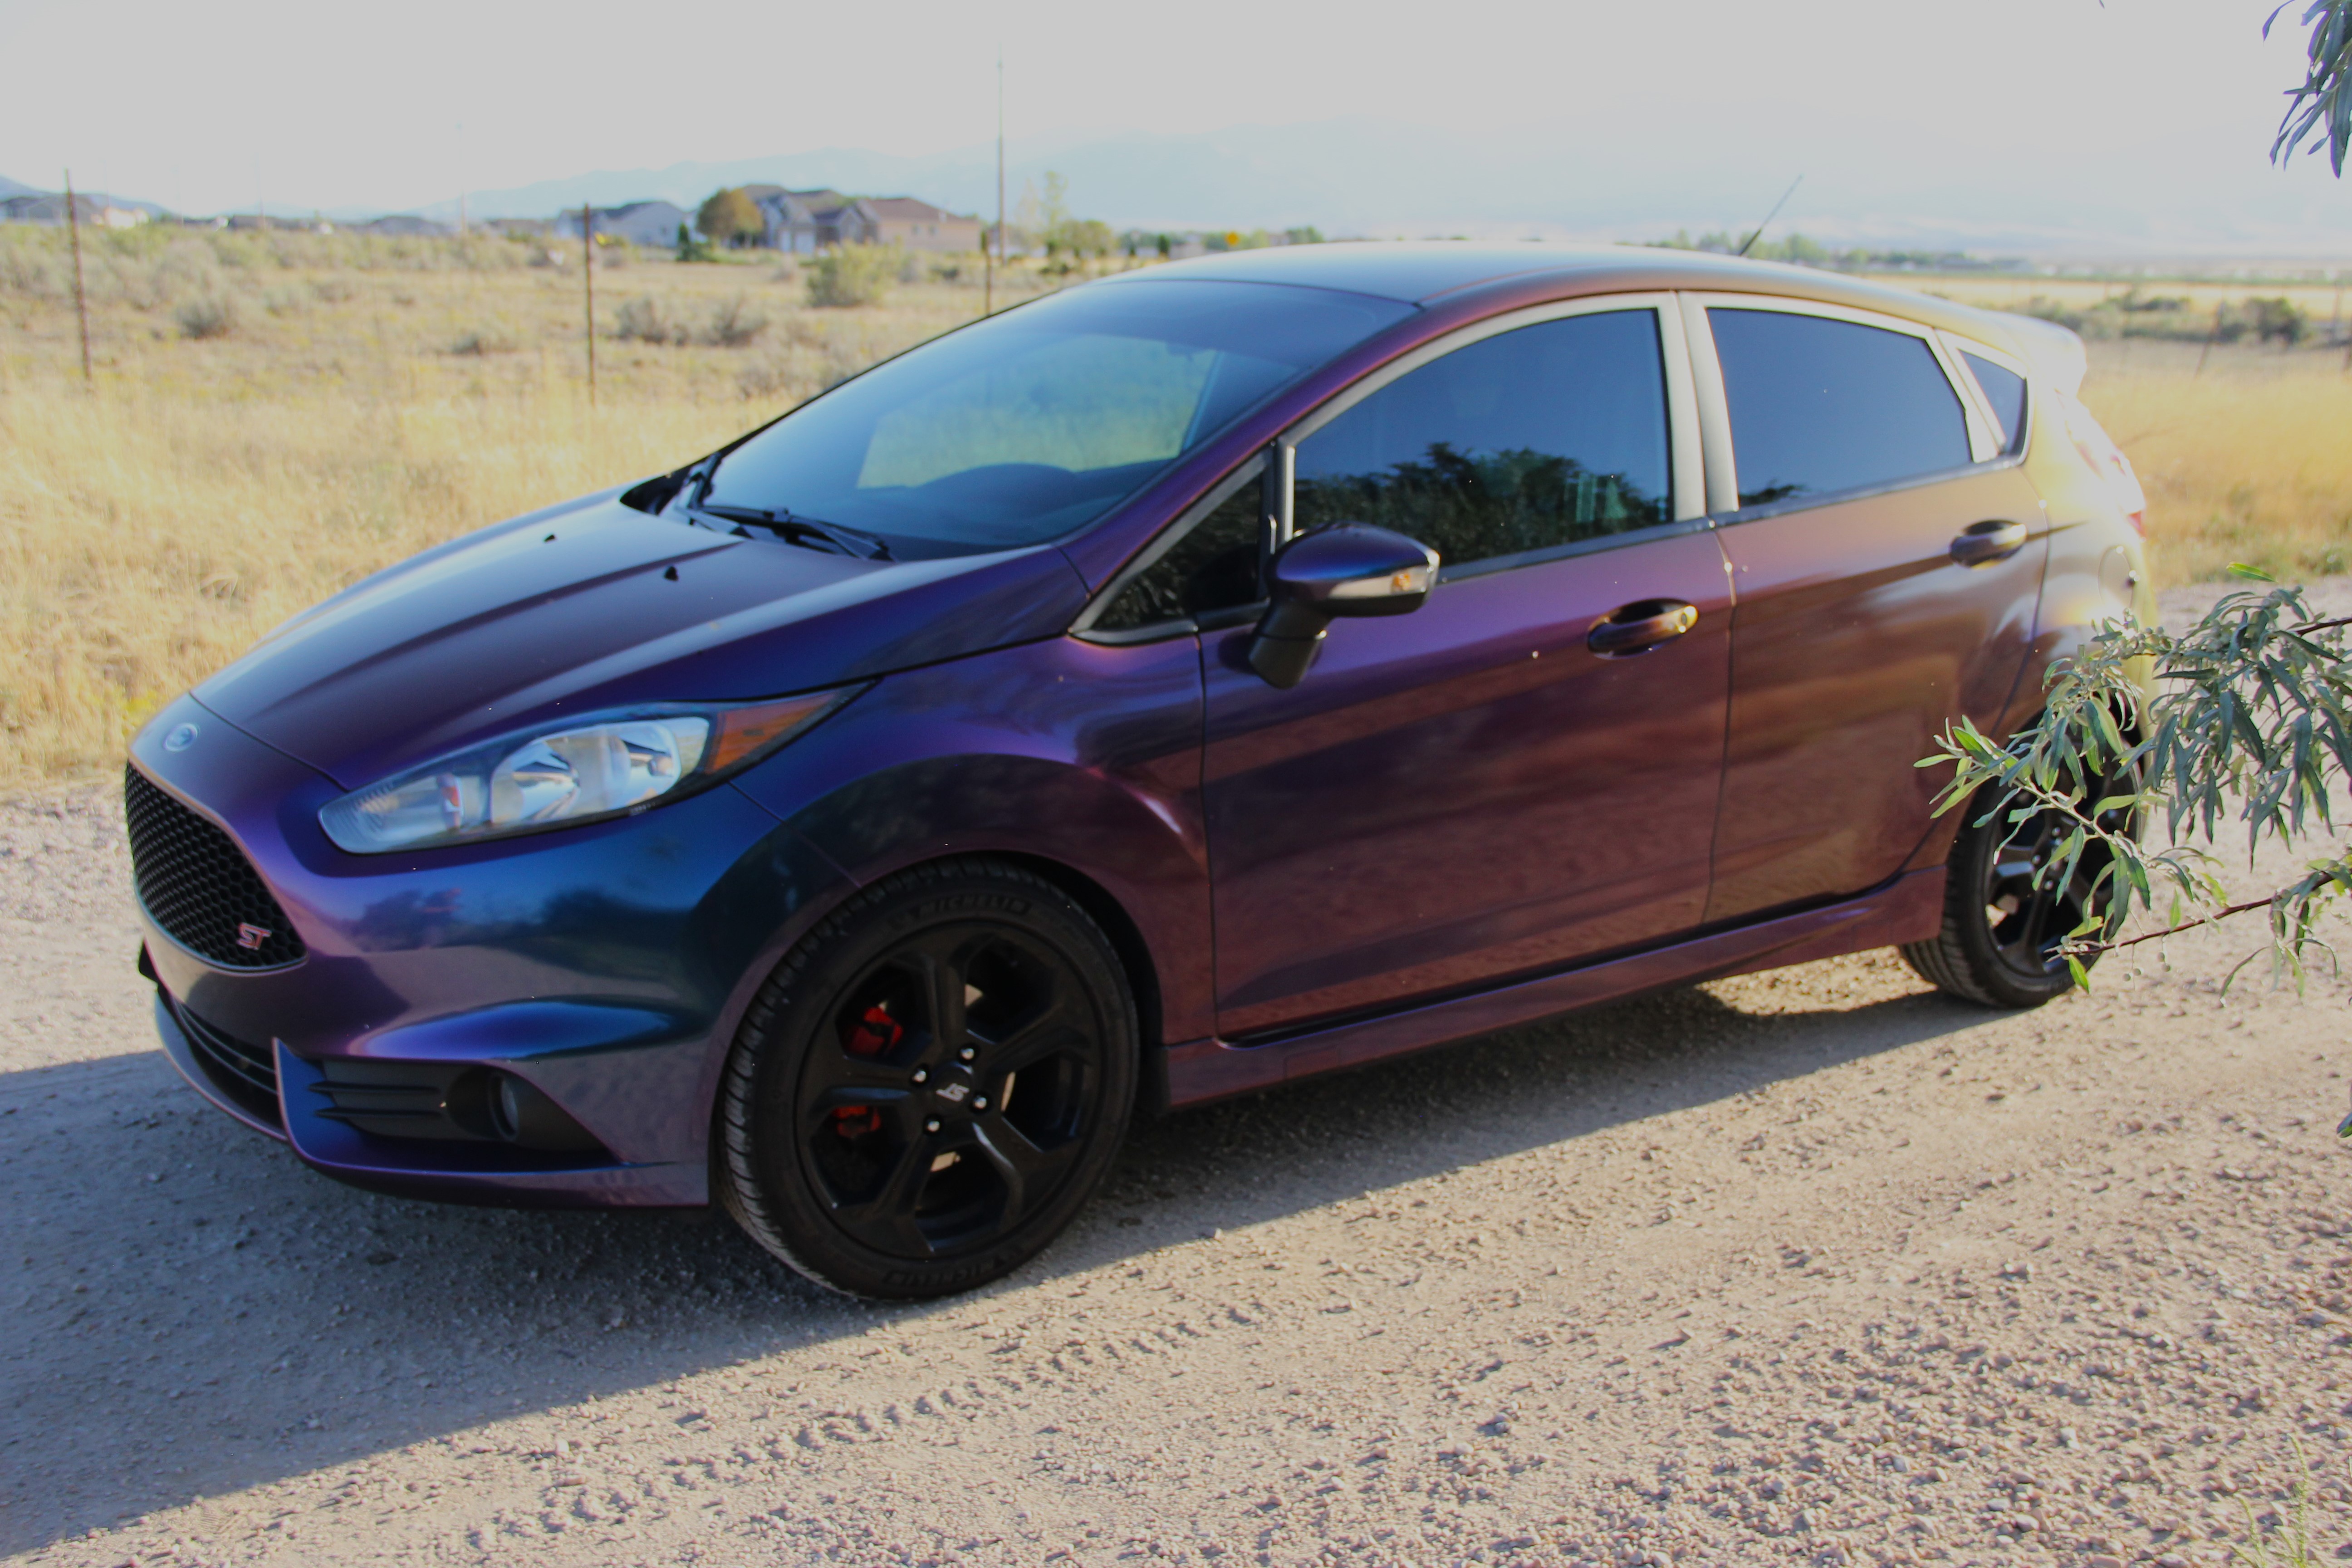 Used Ford Fiesta ST for Sale Right Now - Autotrader